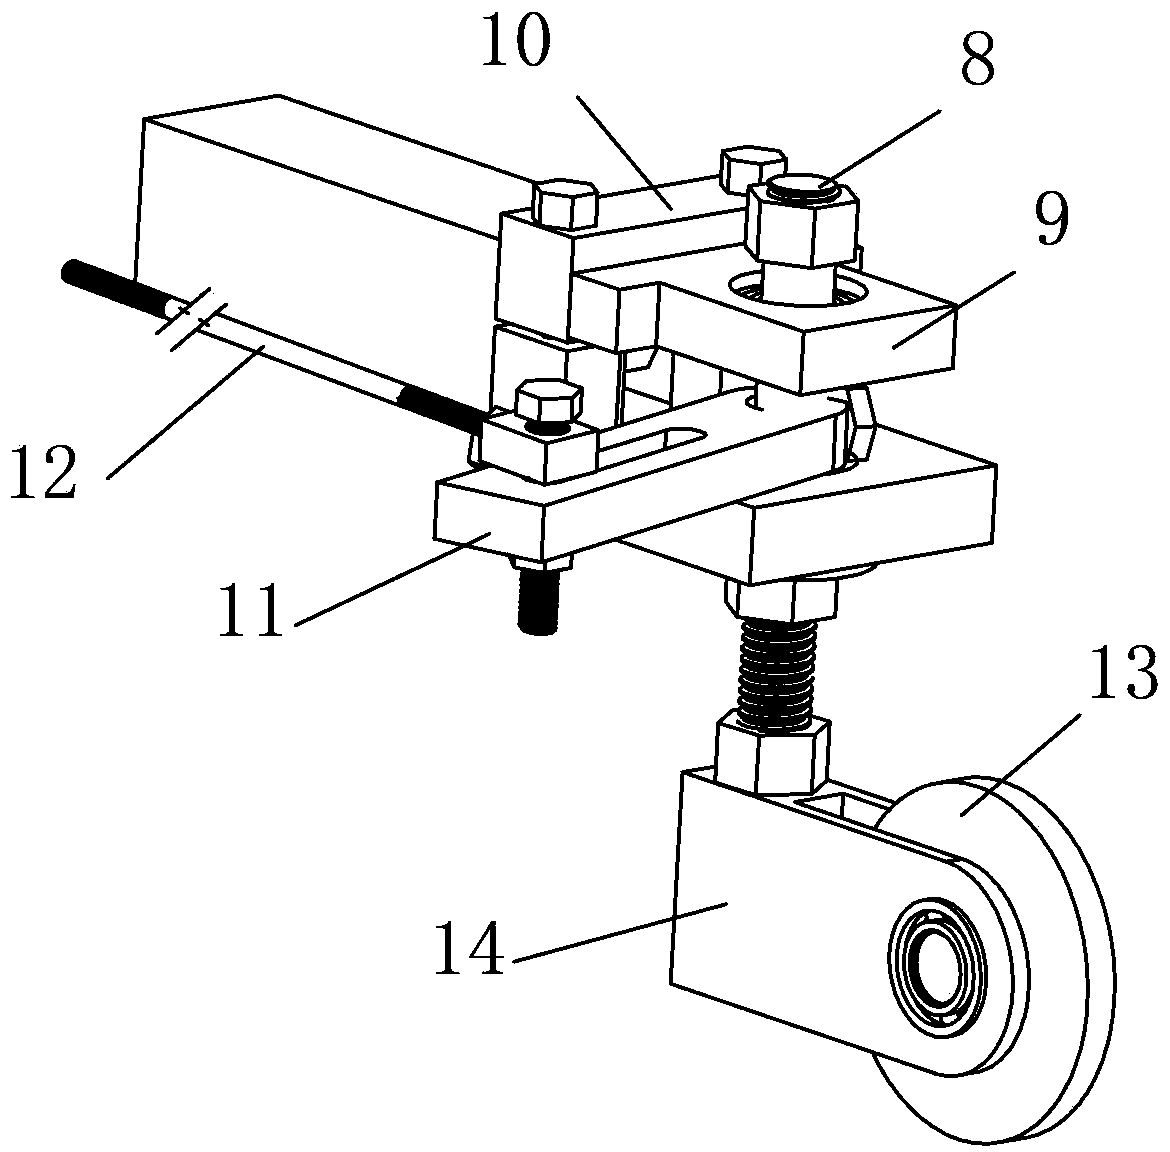 Front wheel steering mechanism of steerable three-wheel carbon-free trolley driven through energy conversion